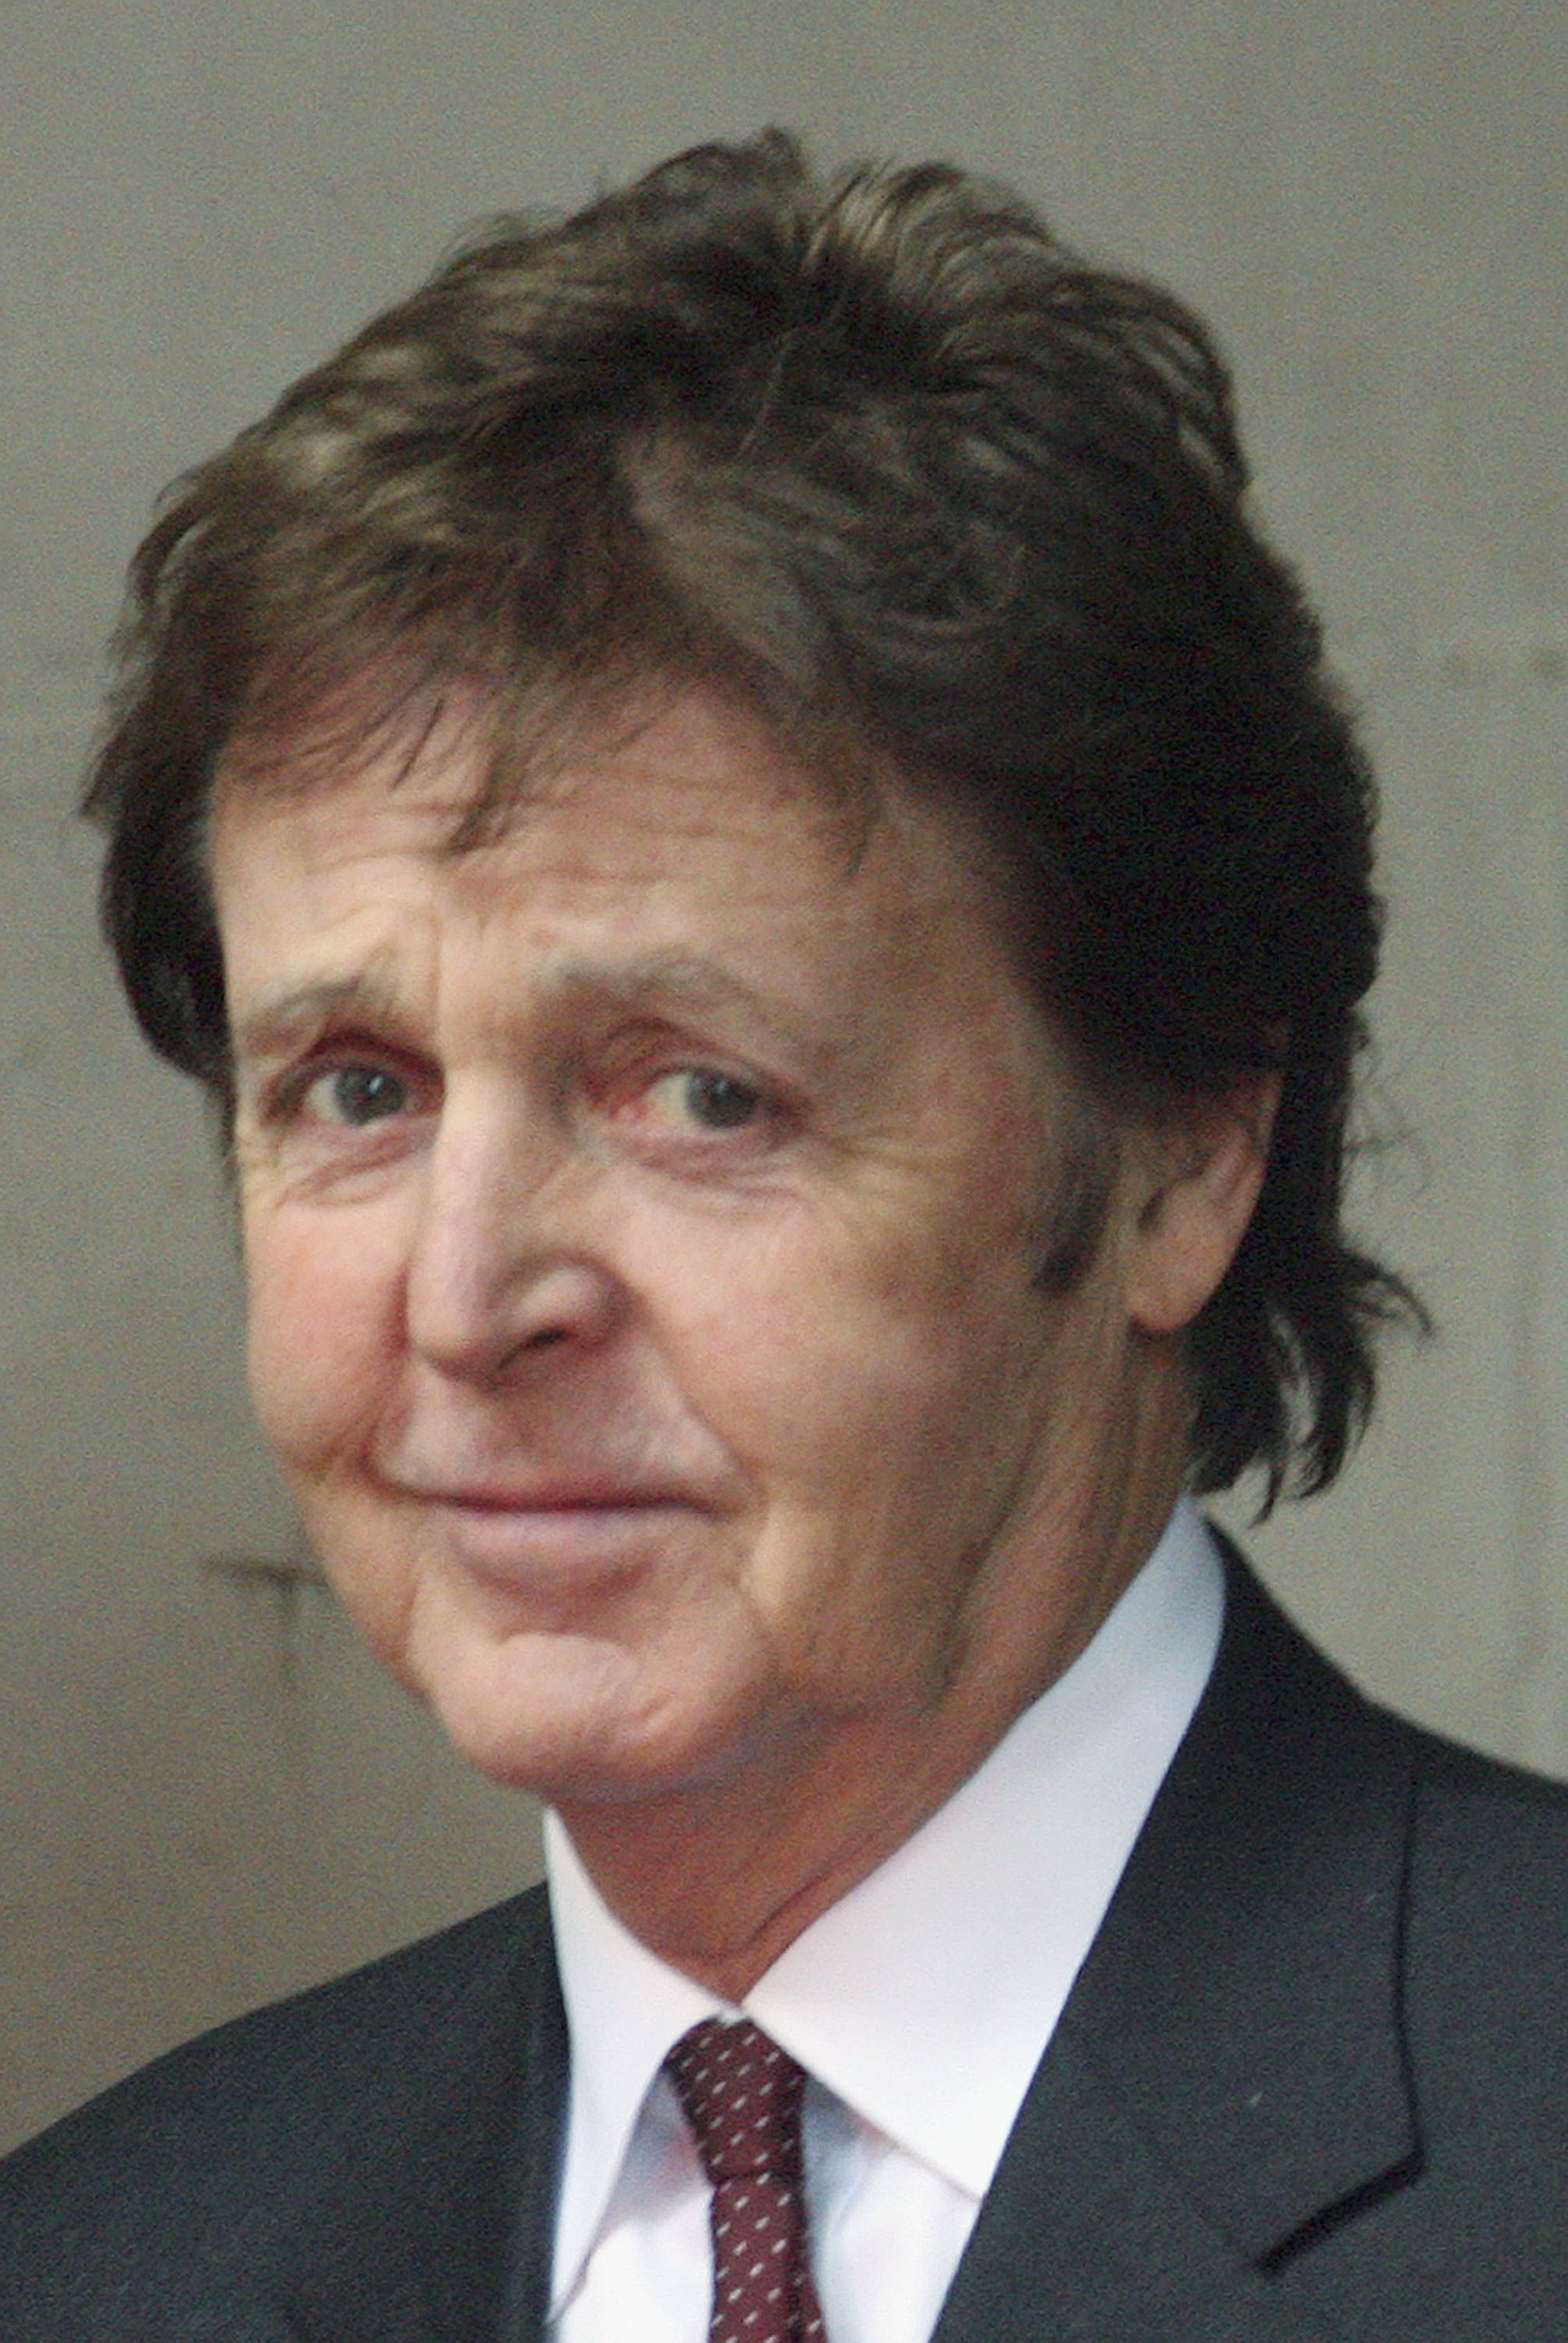 Paul McCartney during his divorce proceedings in 2007. | Source: Getty Images